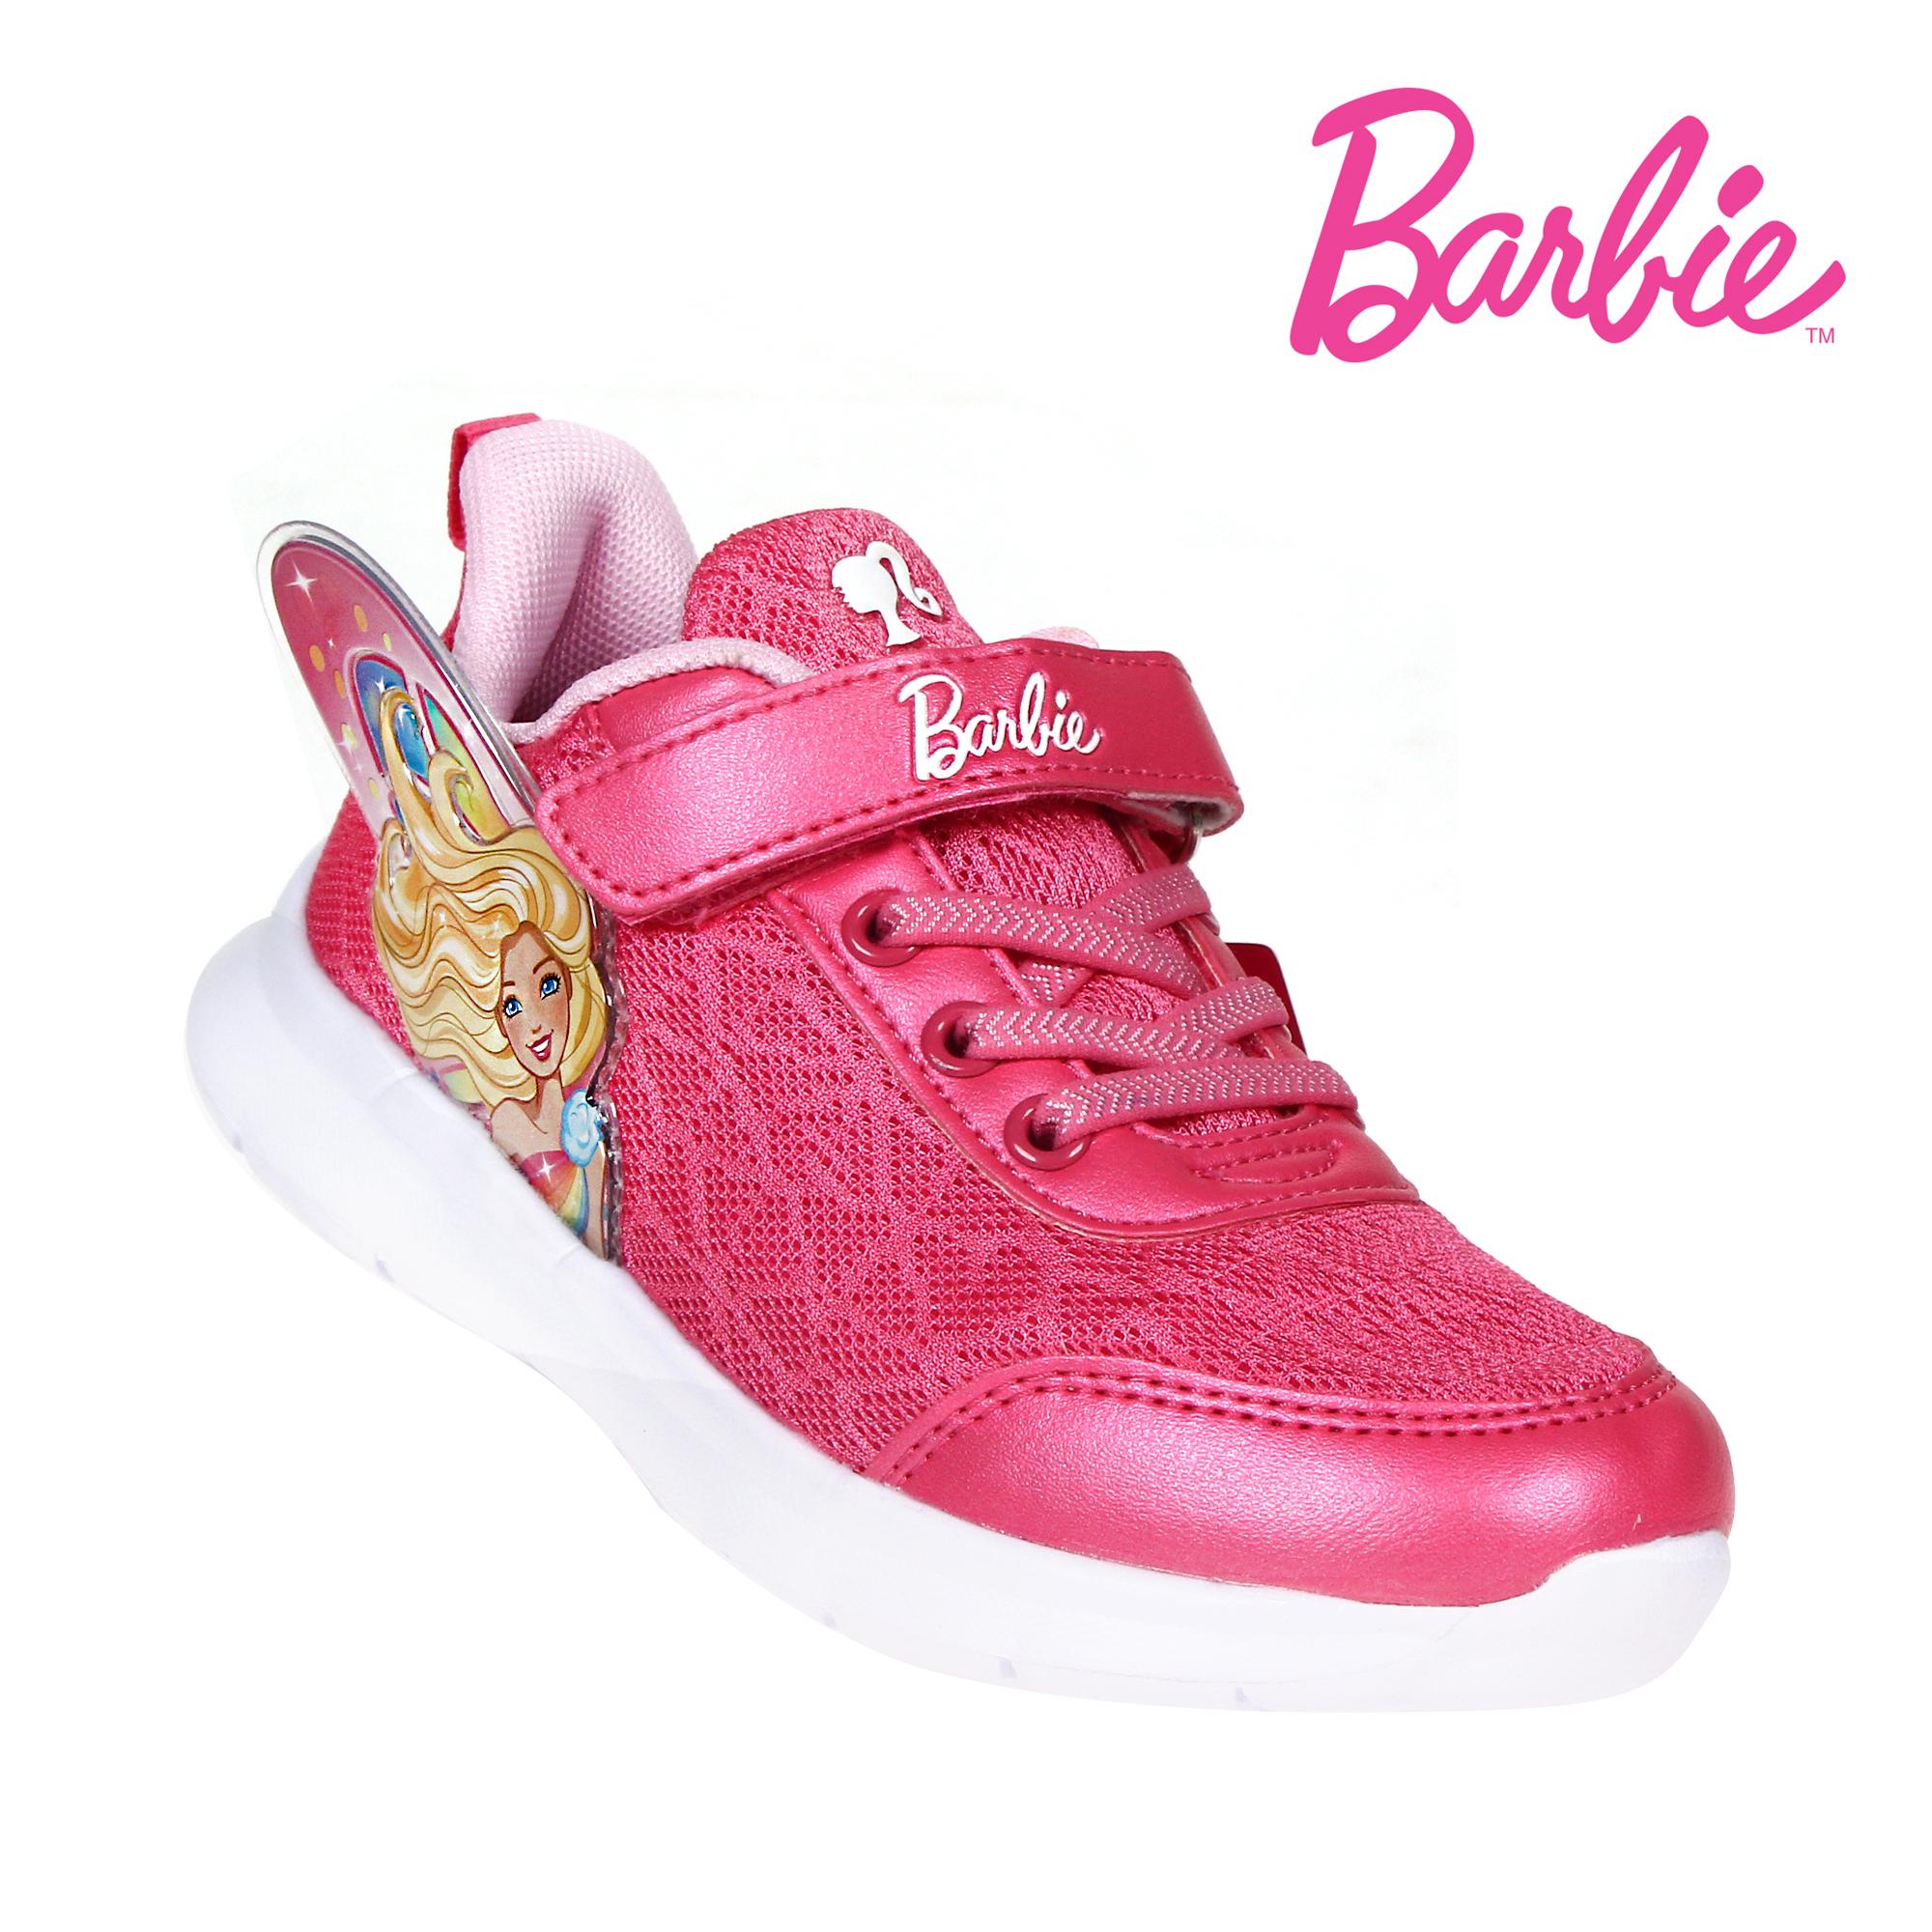 Barbie Chira LED Wheeled Shoes for Kids 